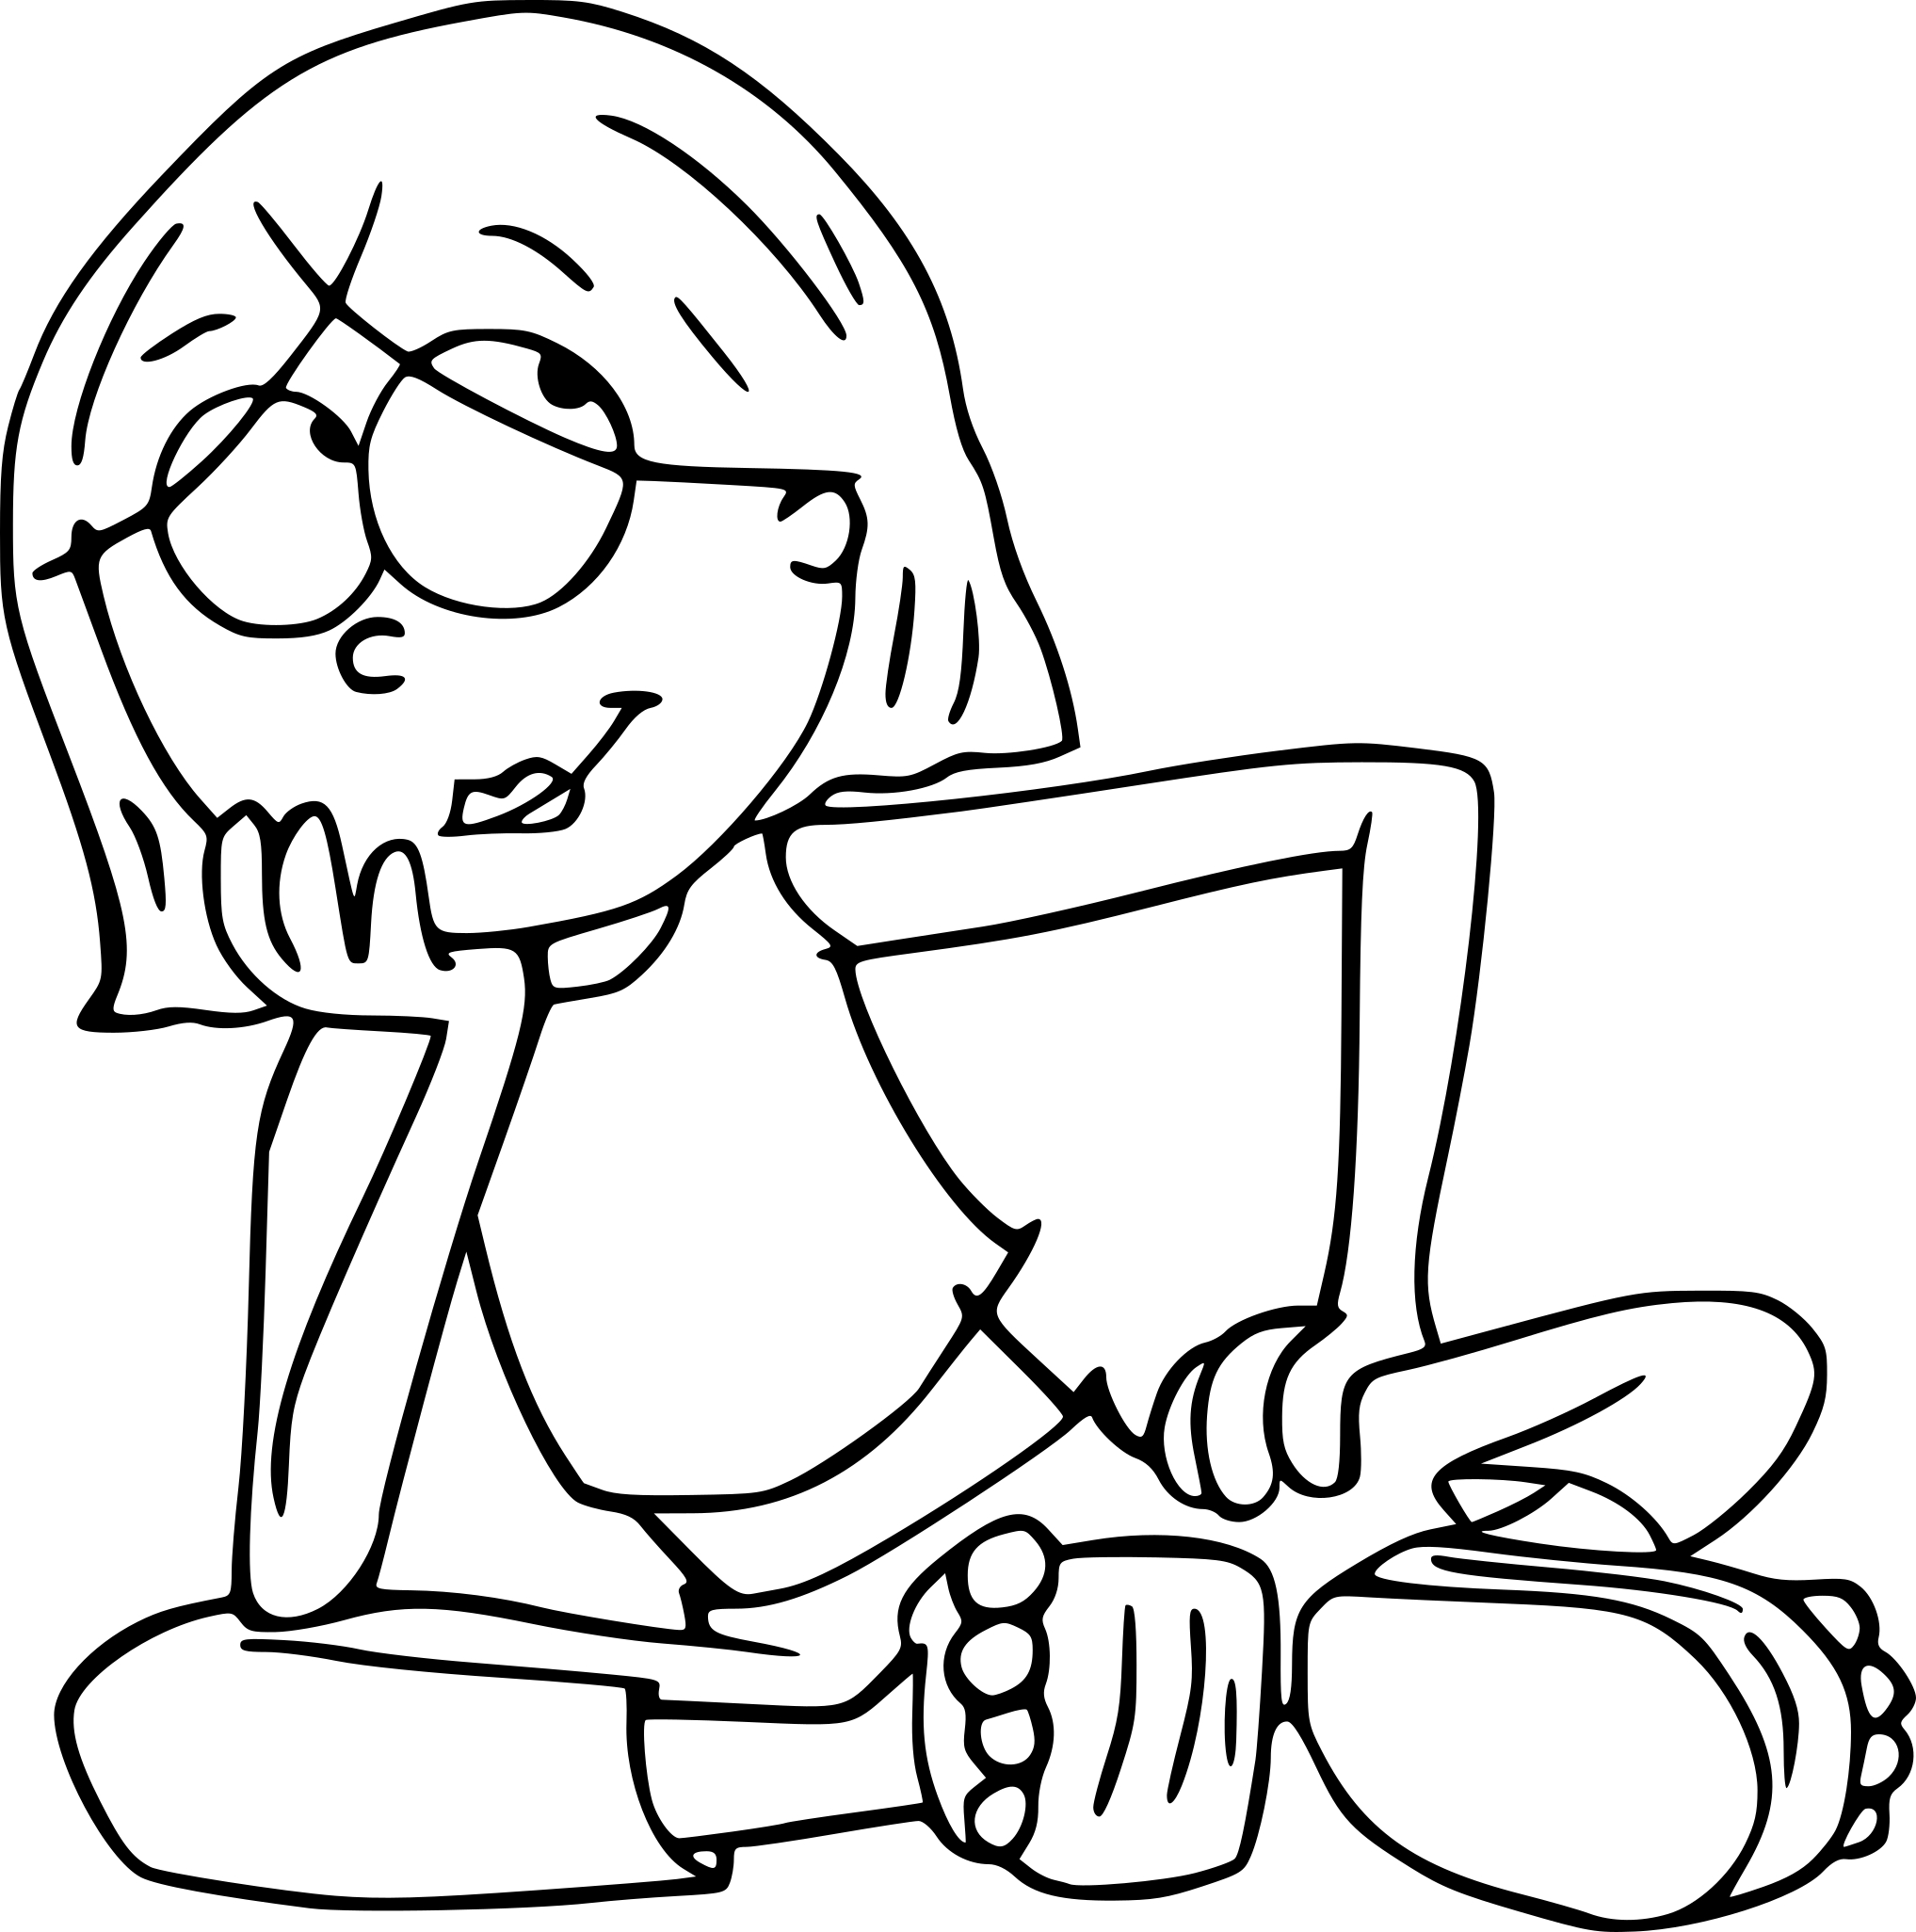 Lizzie Mcguire coloring page